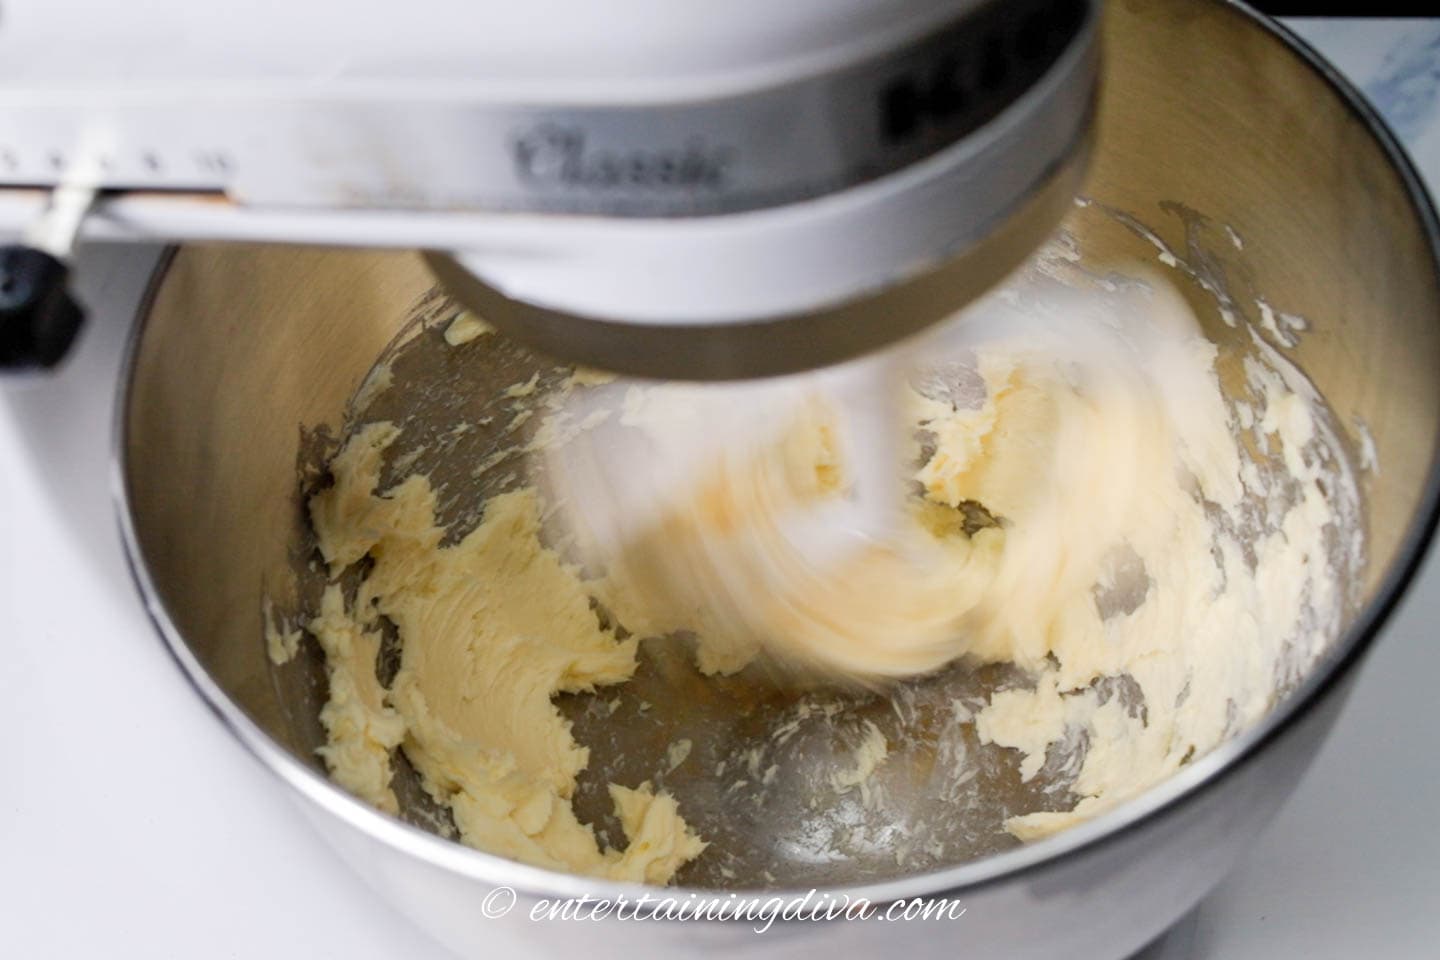 Beating butter in a mixer